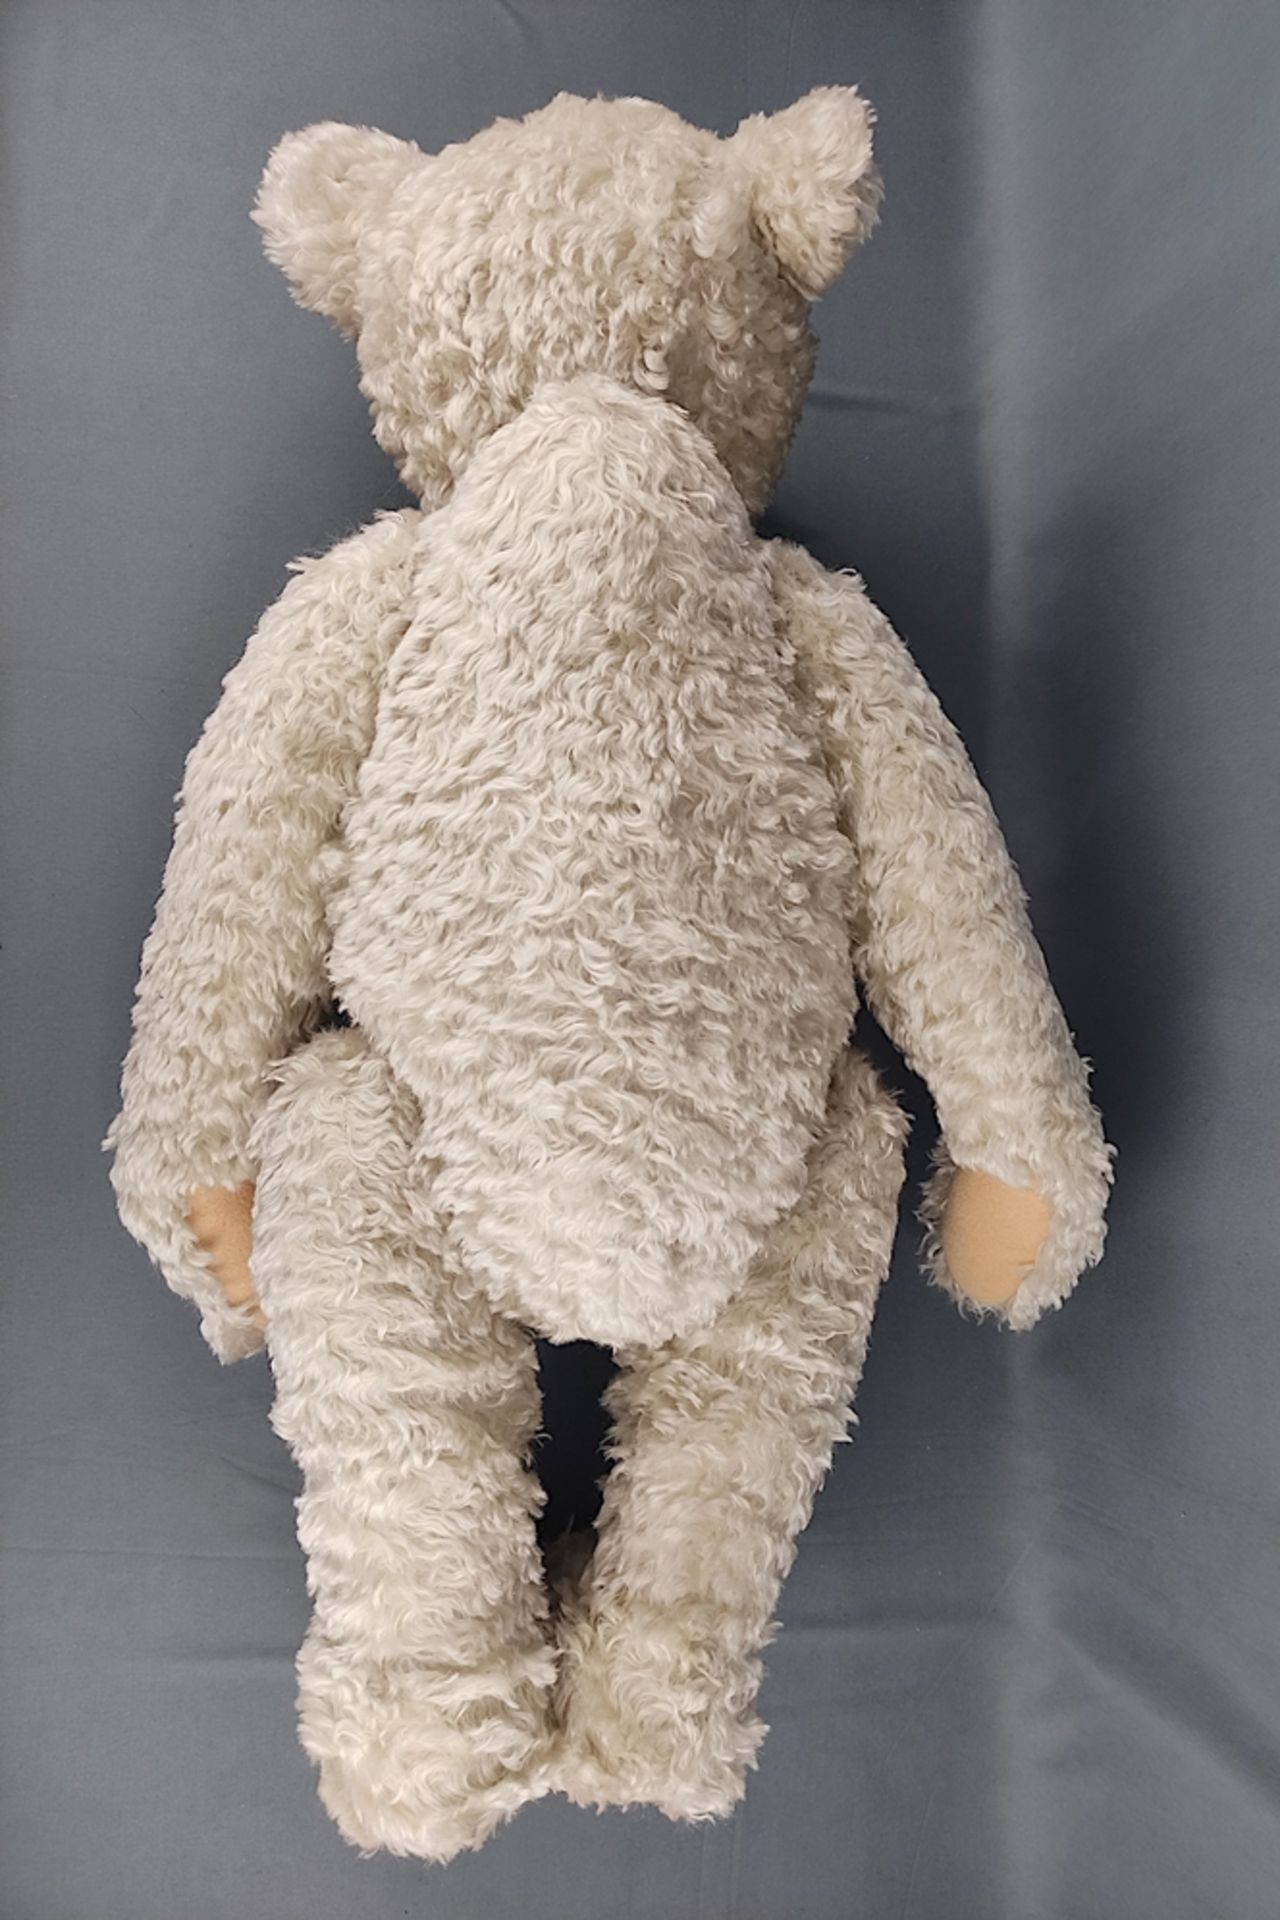 Steiff replica teddy bear "1908", enclosed certificate, height 65cm, in original box, unplayed cond - Image 2 of 4